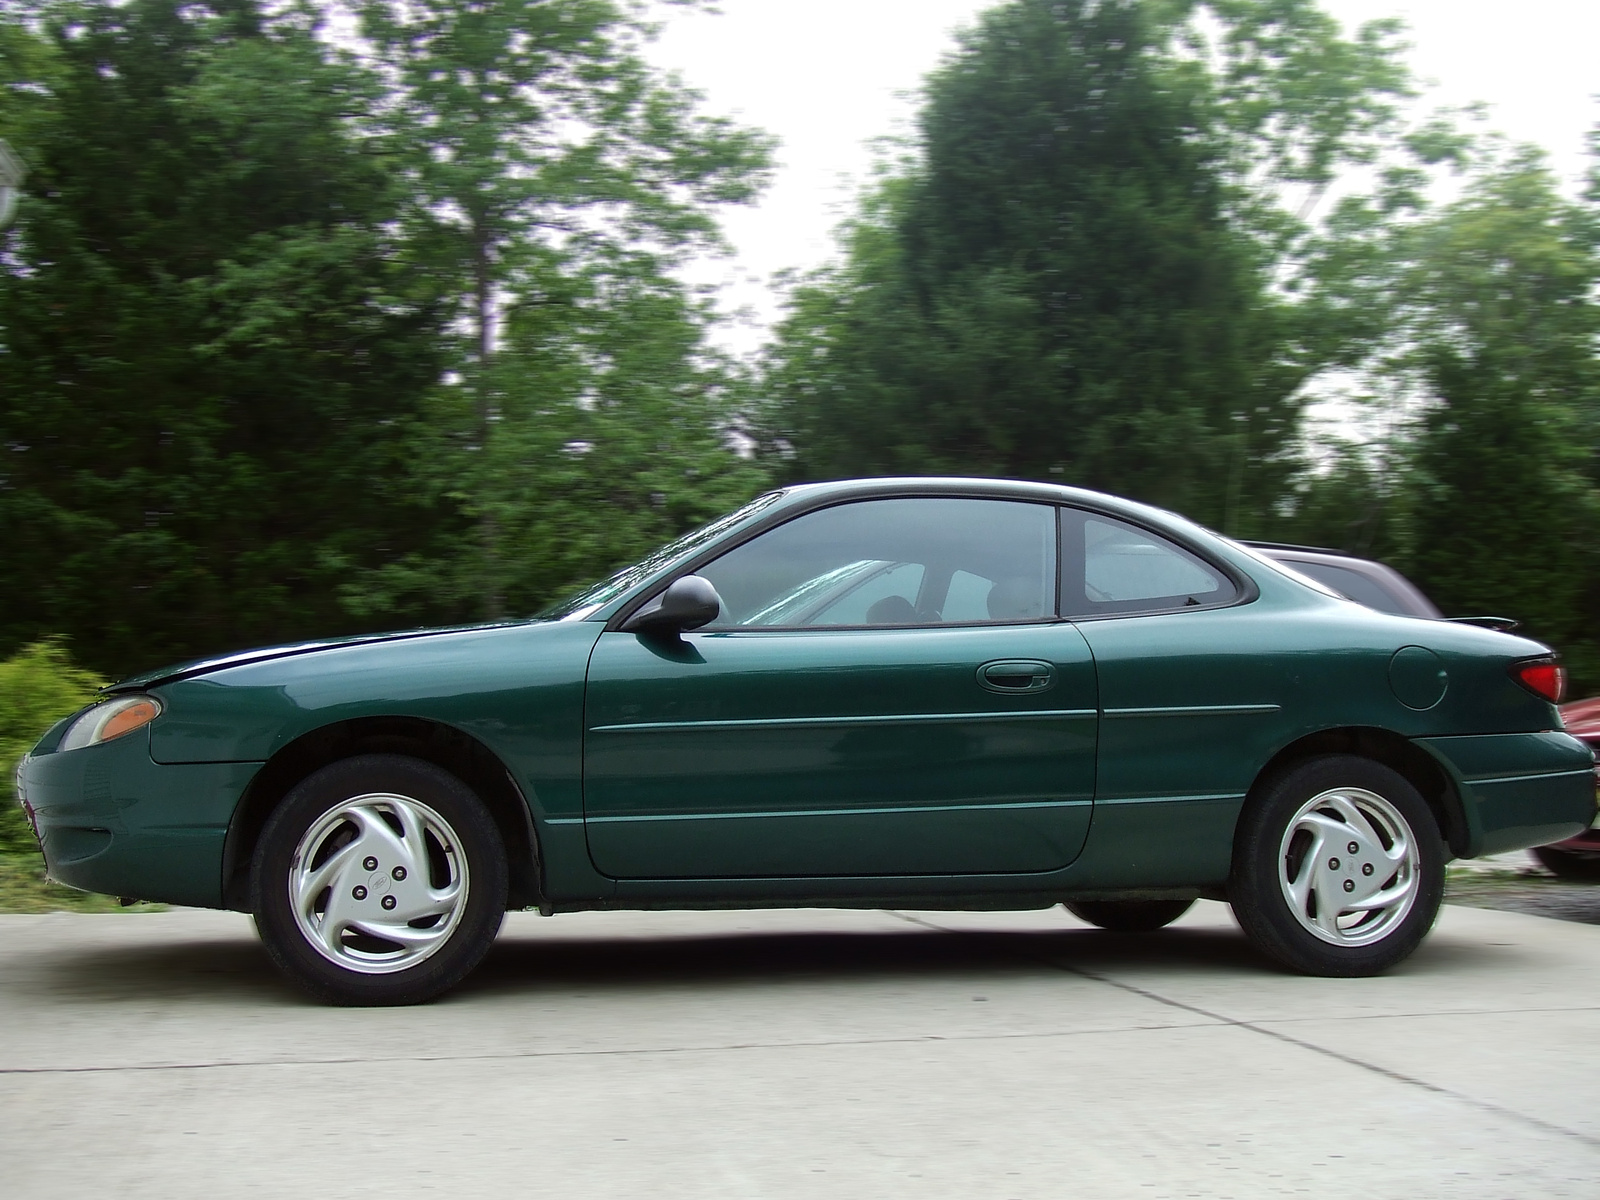 1998 Ford escort zx2 cool coupe #3